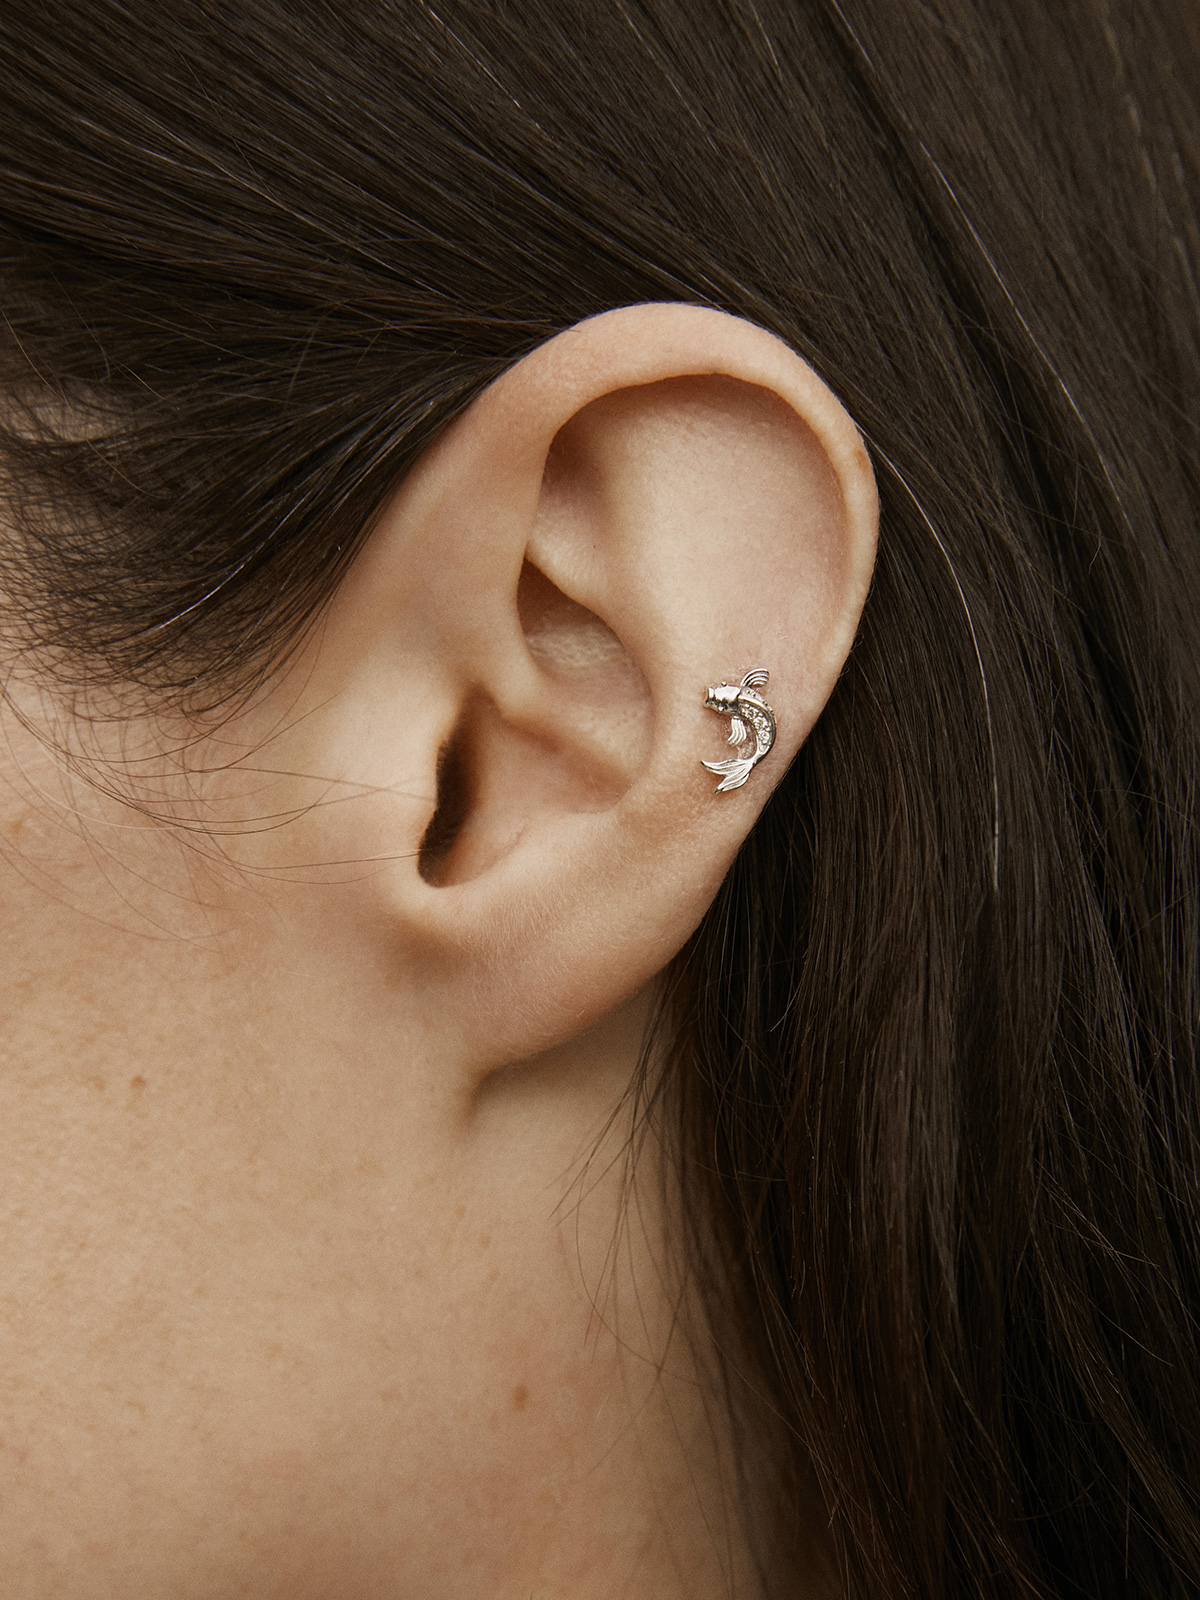 18K White Gold Piercing with Diamonds and Fish Shape